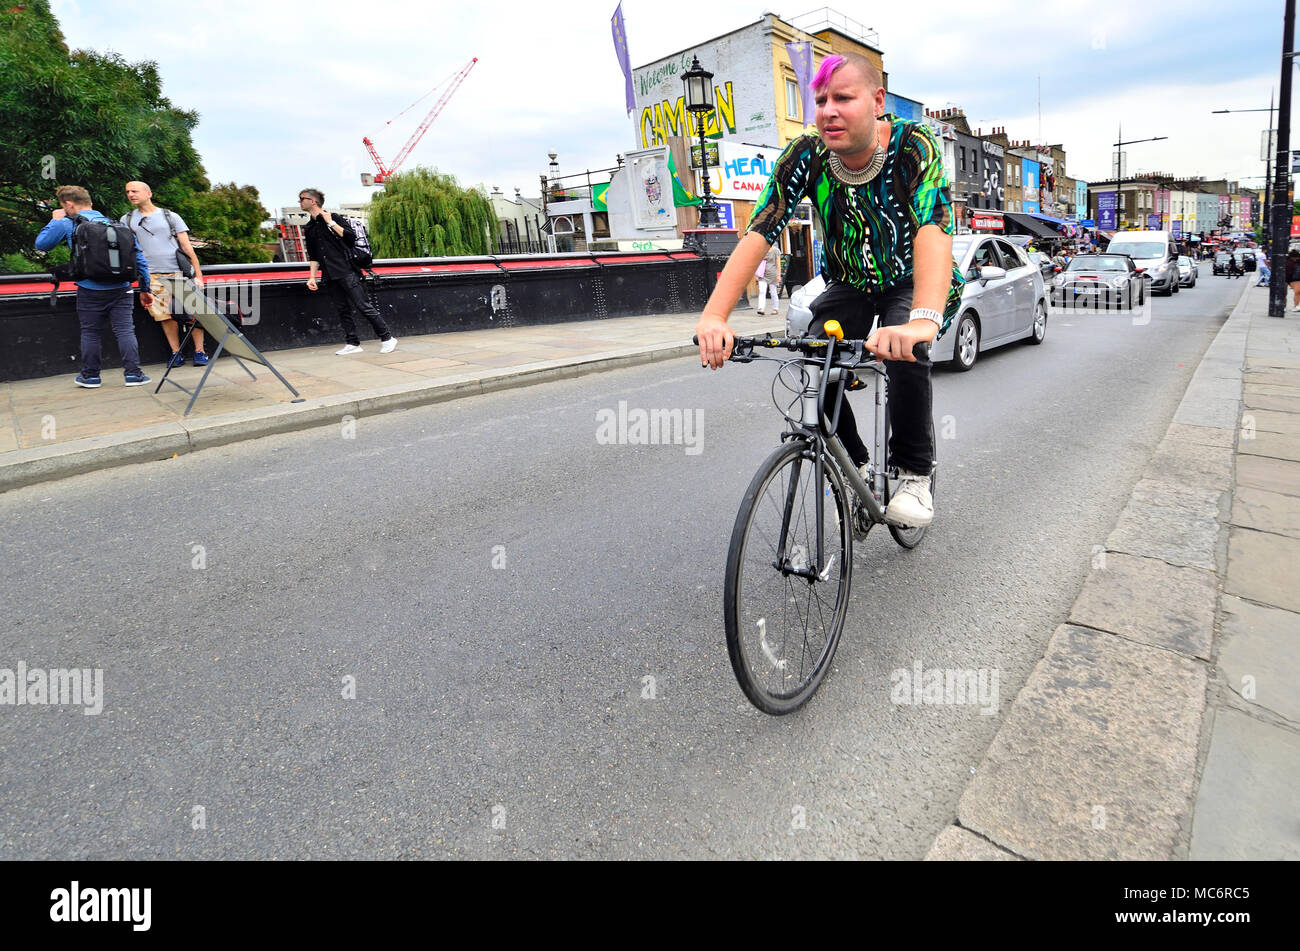 London, England, UK. Camden - man with pink hair on a bike Stock Photo